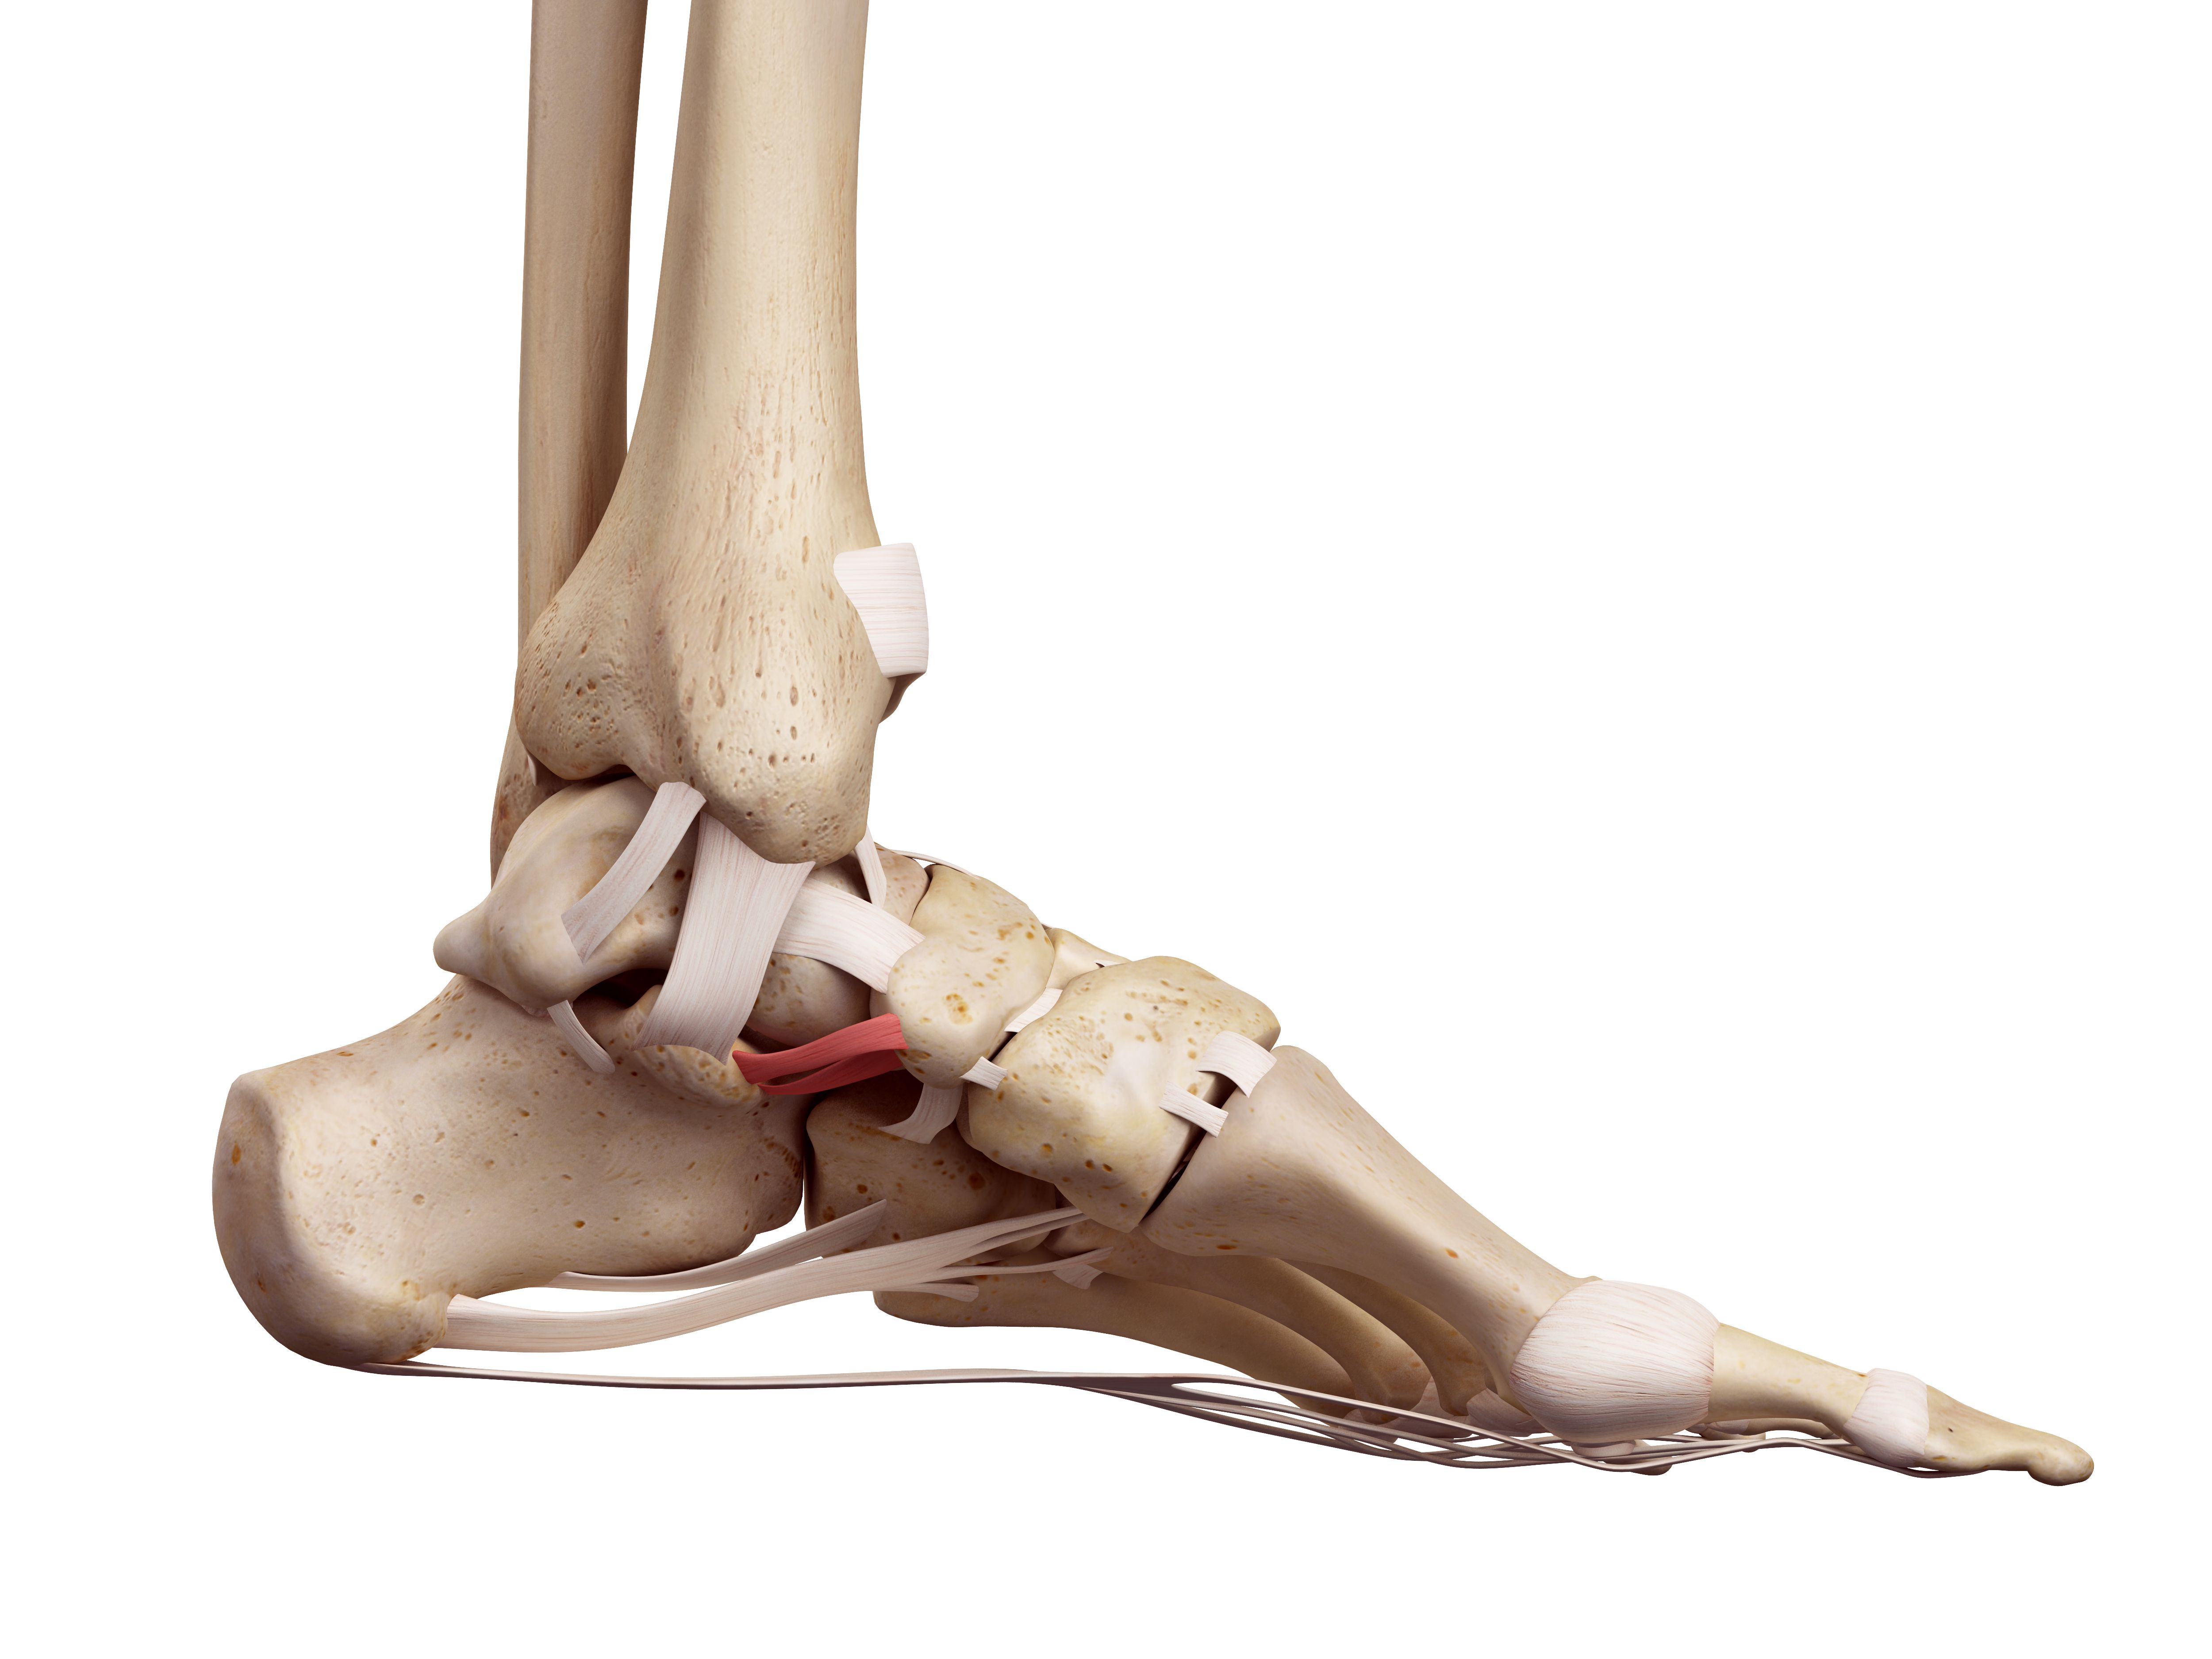 Plantar Fasciitis Physical Therapy for Heel Pain | ATI